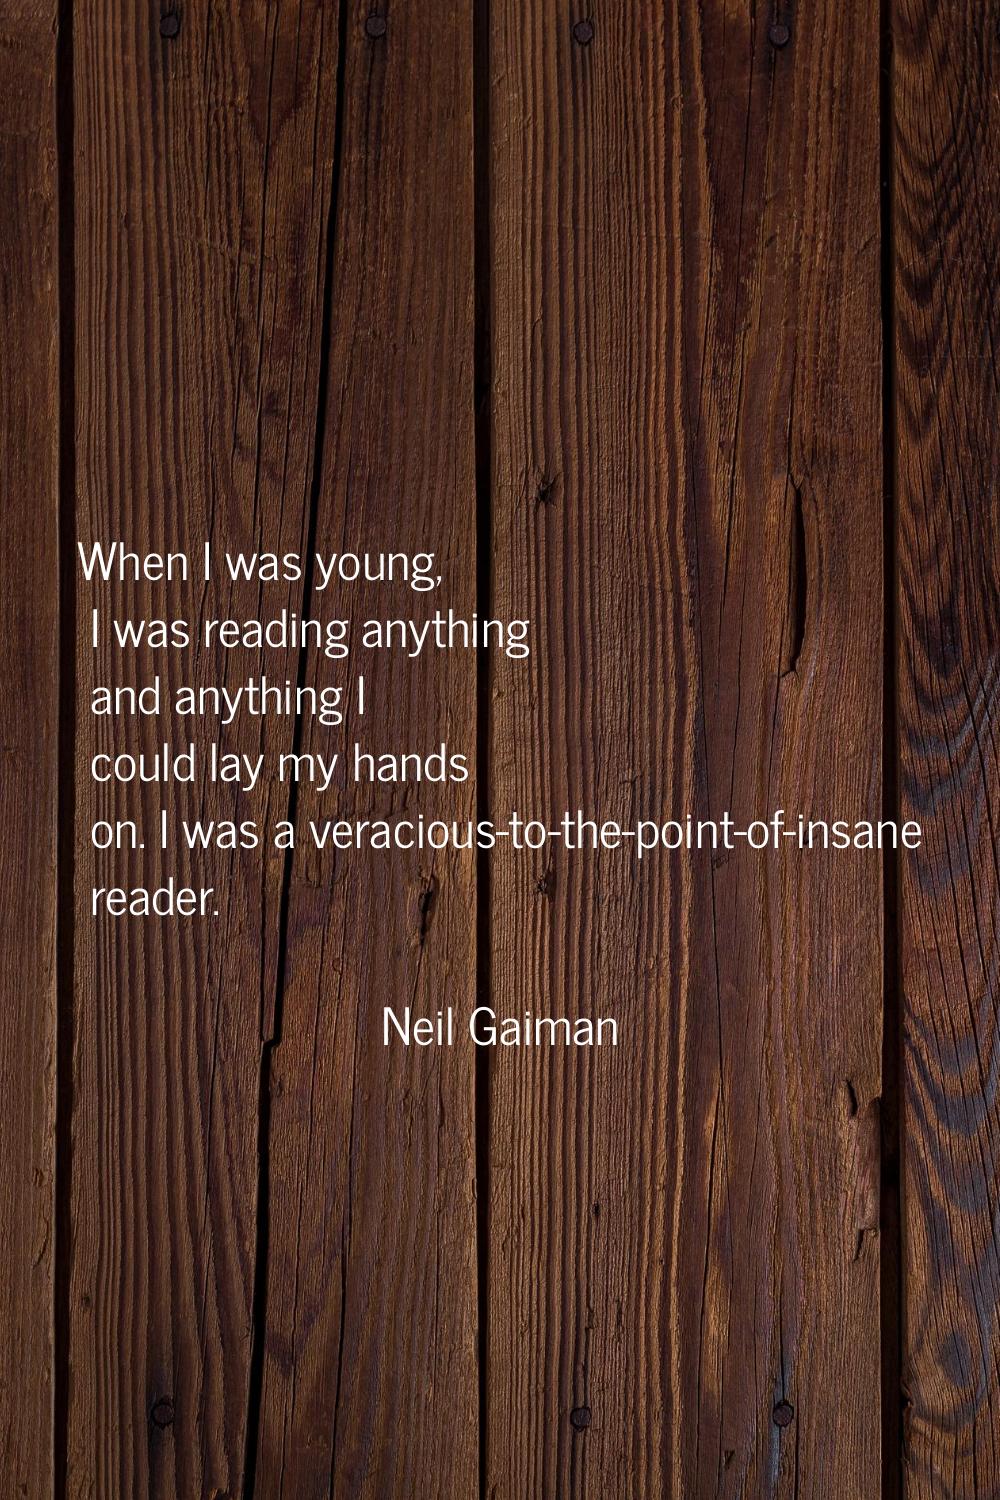 When I was young, I was reading anything and anything I could lay my hands on. I was a veracious-to